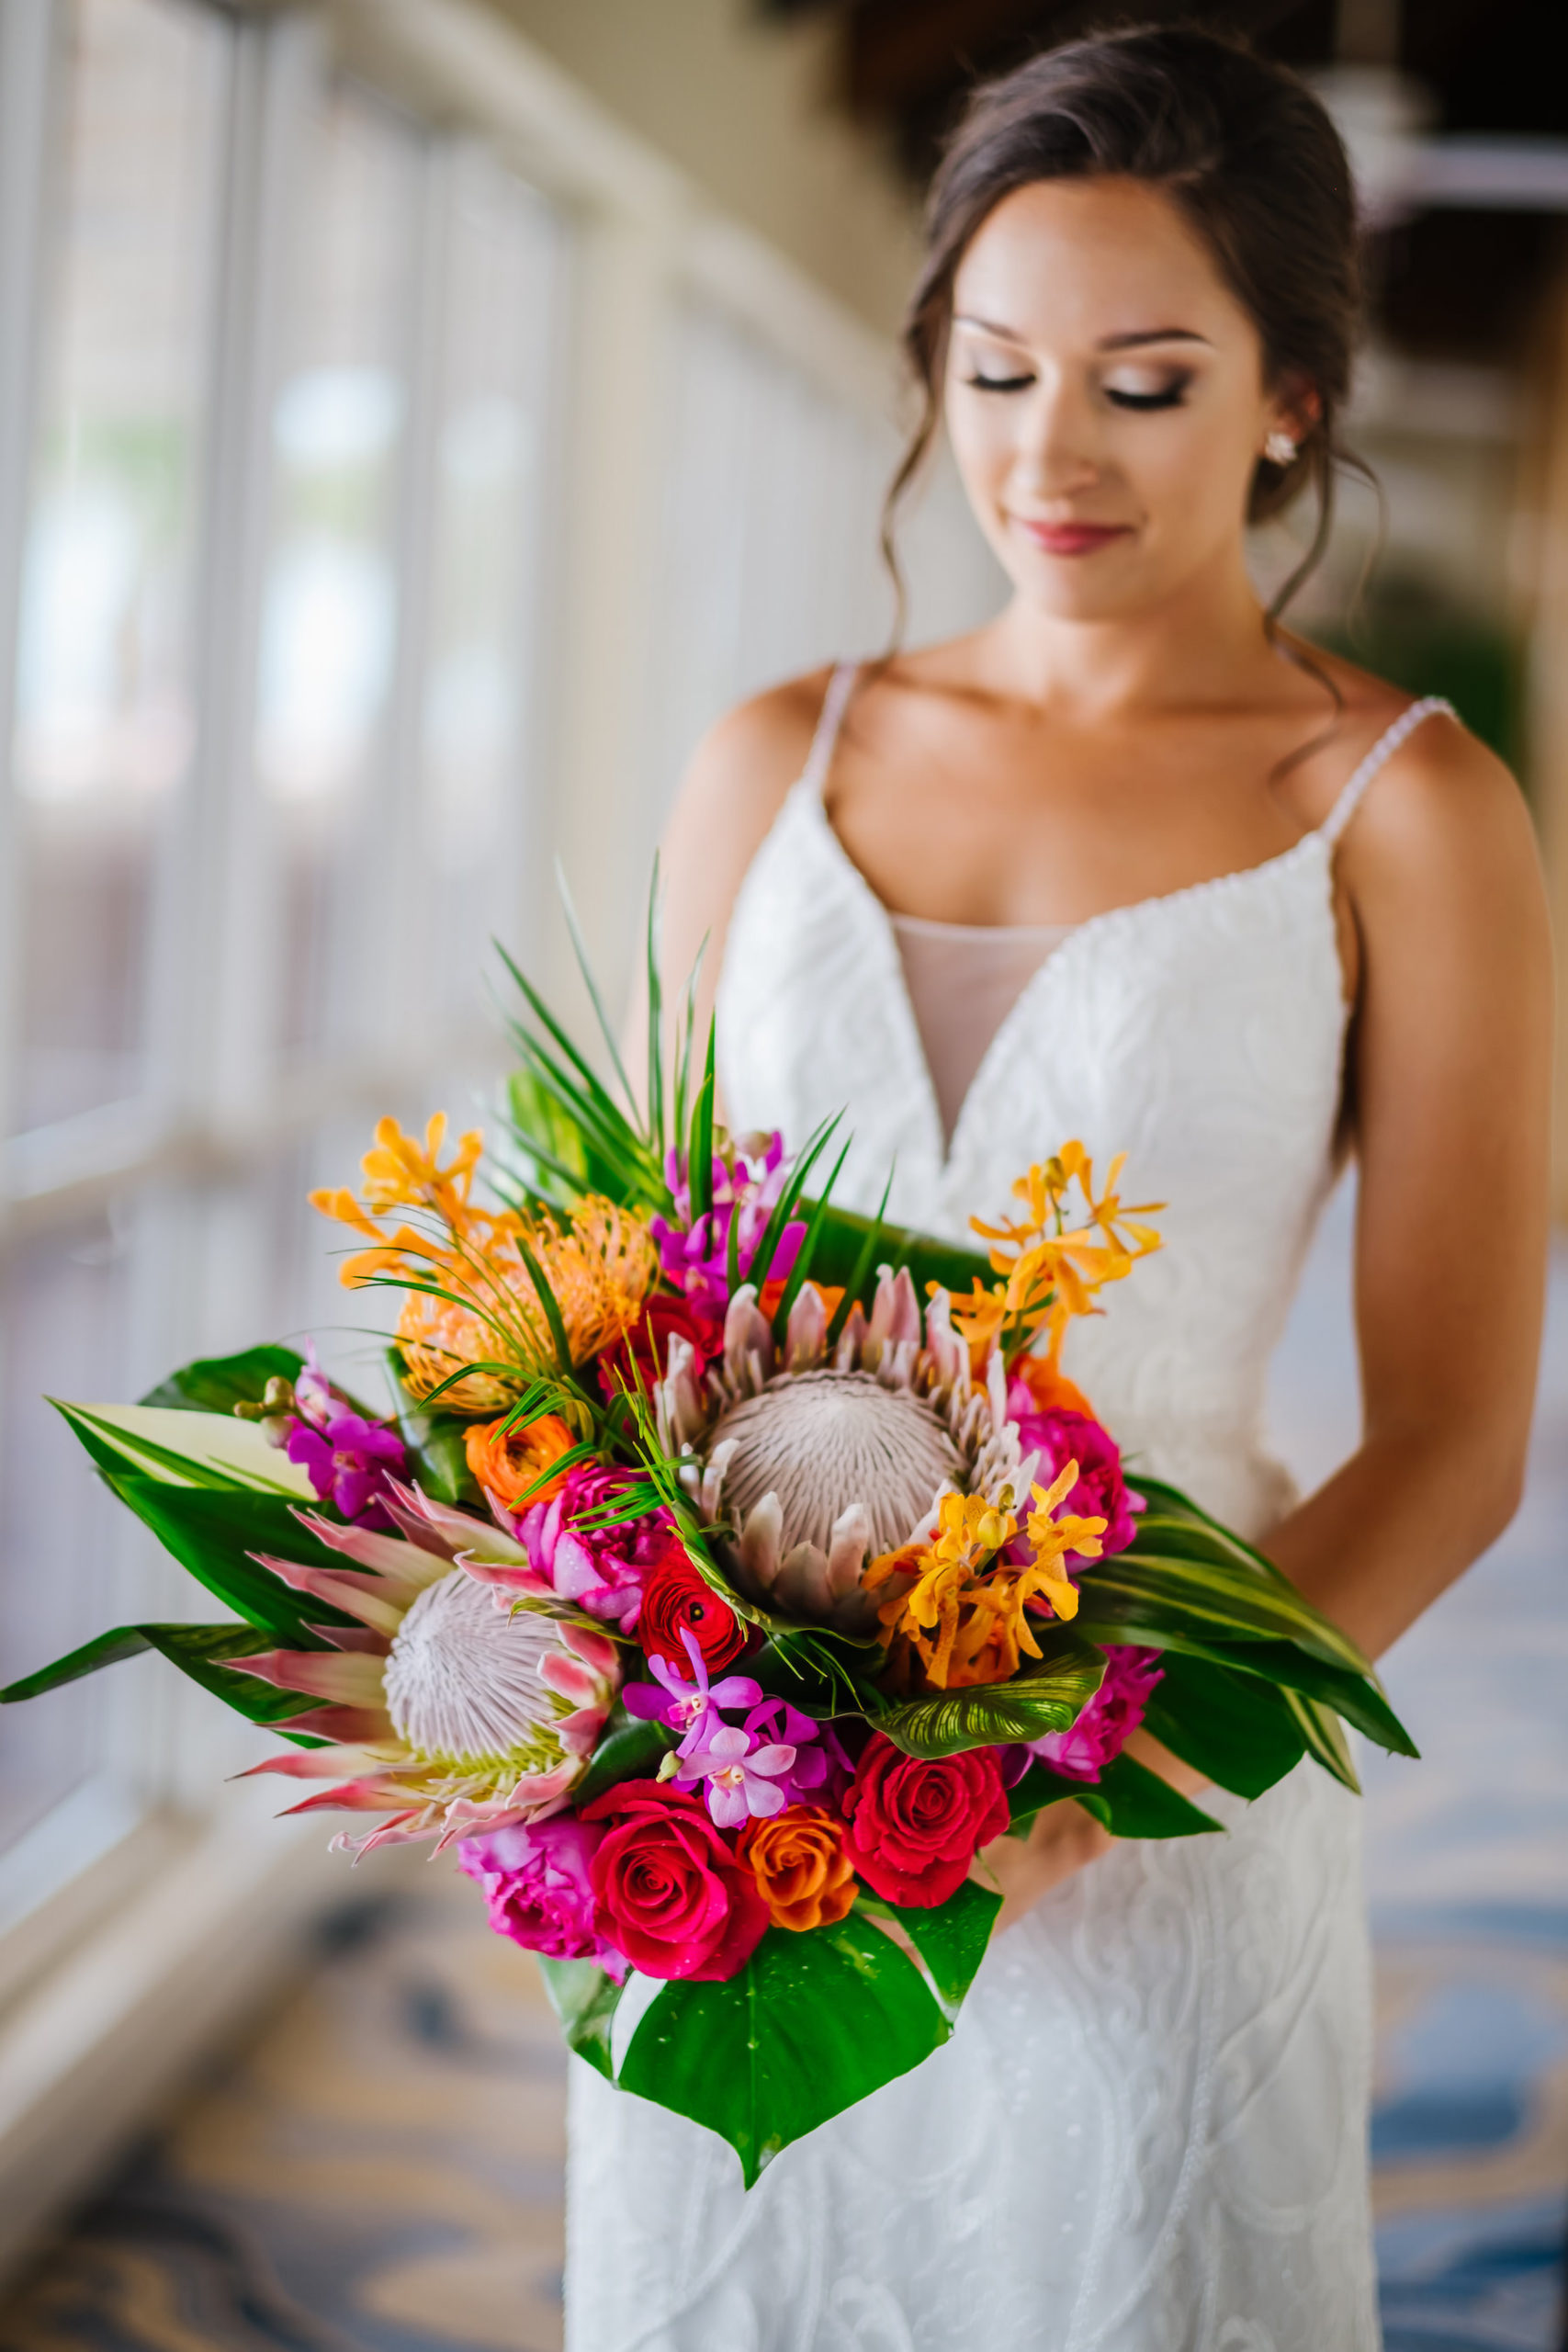 INSTAGRAM Bride Holding Tropical King Protea, Red and Orange Roses, Pink and Yellow Floral Accents, Monstera and Palm Fronds Wedding Floral Bridal Bouquet Portrait